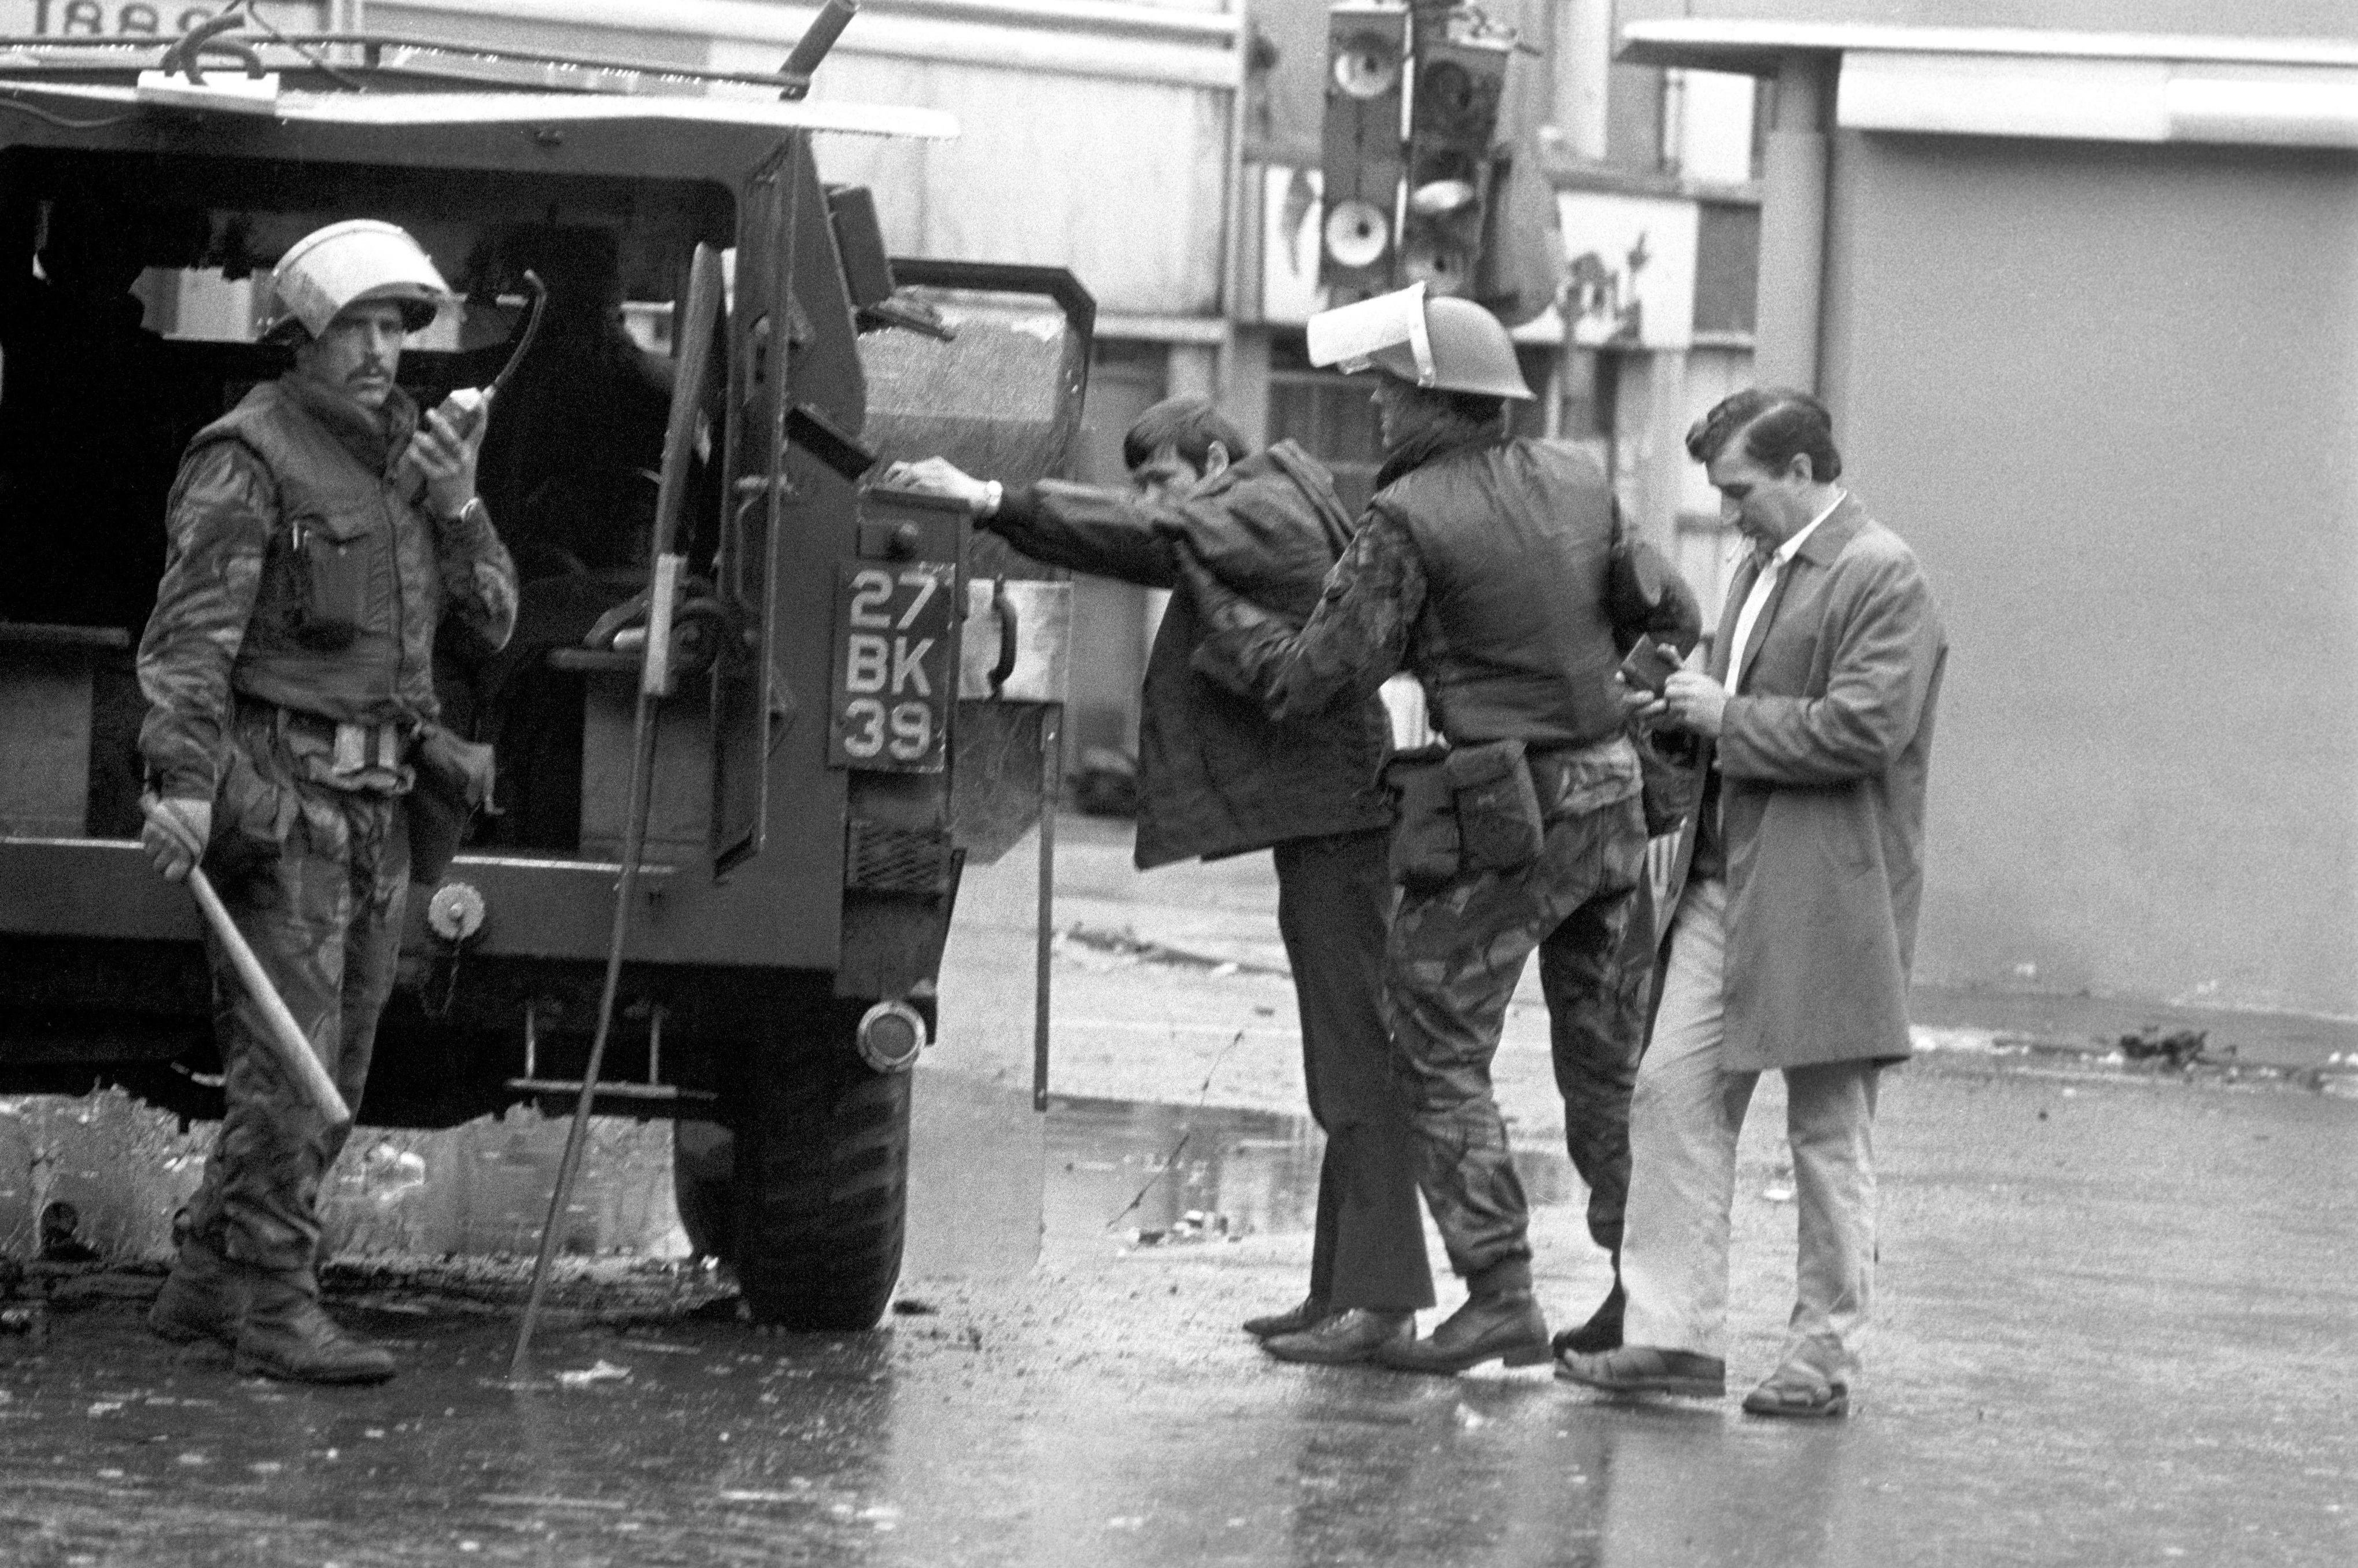 Daniel Hegarty shooting: DUP anger at request for PPS to probe veterans’ reunion 50 years after Londonderry death in 1972 Operation Motorman